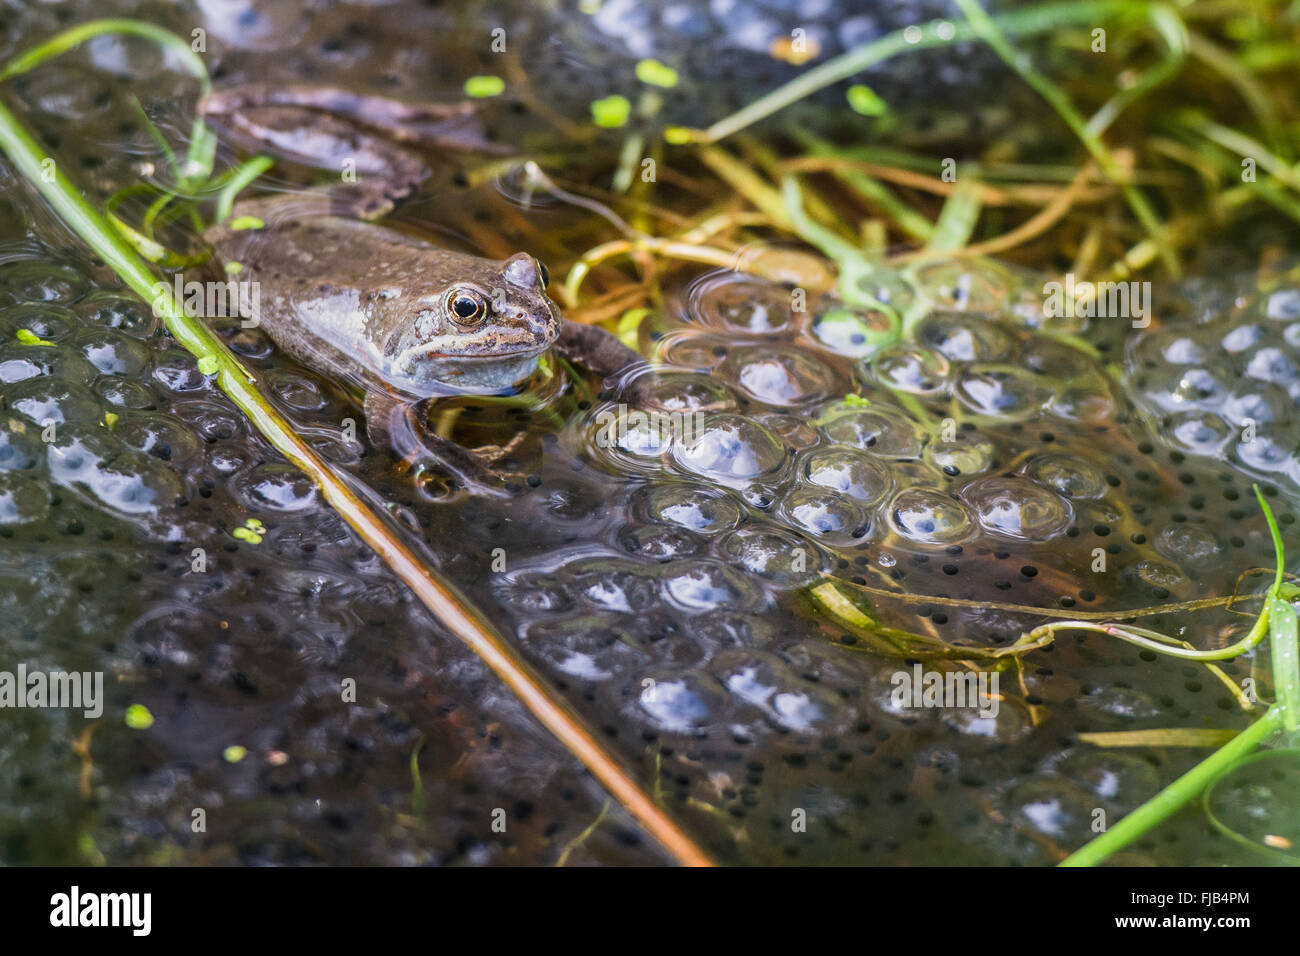 Common European Frog (Rana Temporaria) with spawn in grassy pool of water (taken in Wicklow, Ireland) Stock Photo